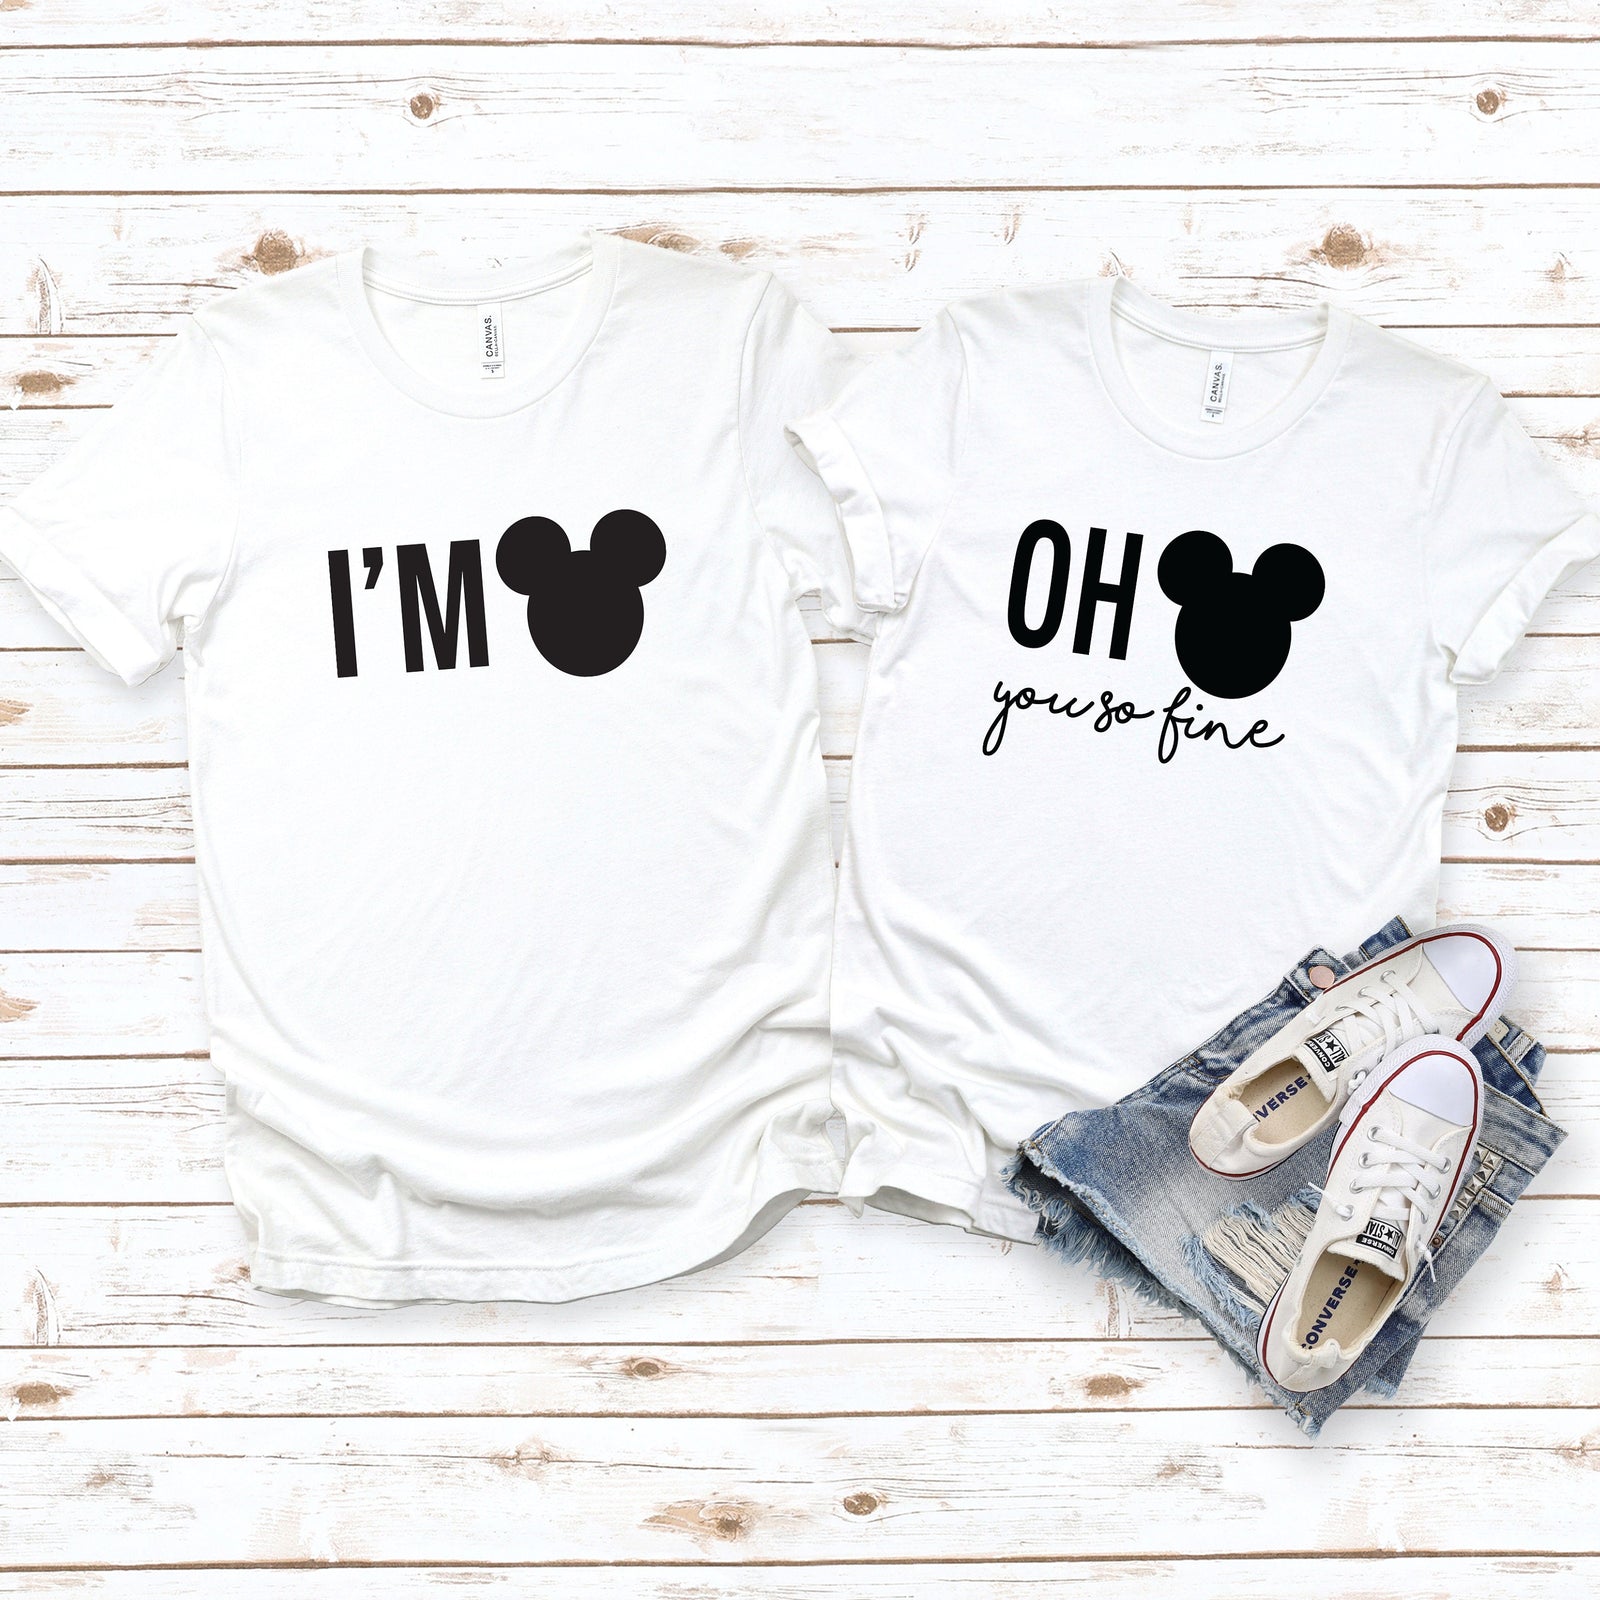 Oh Mickey You So Fine and I'm Mickey Matching T Shirts - Disney Couples Shirt - Valentines Day Set - Mickey Minnie Couple Shirt